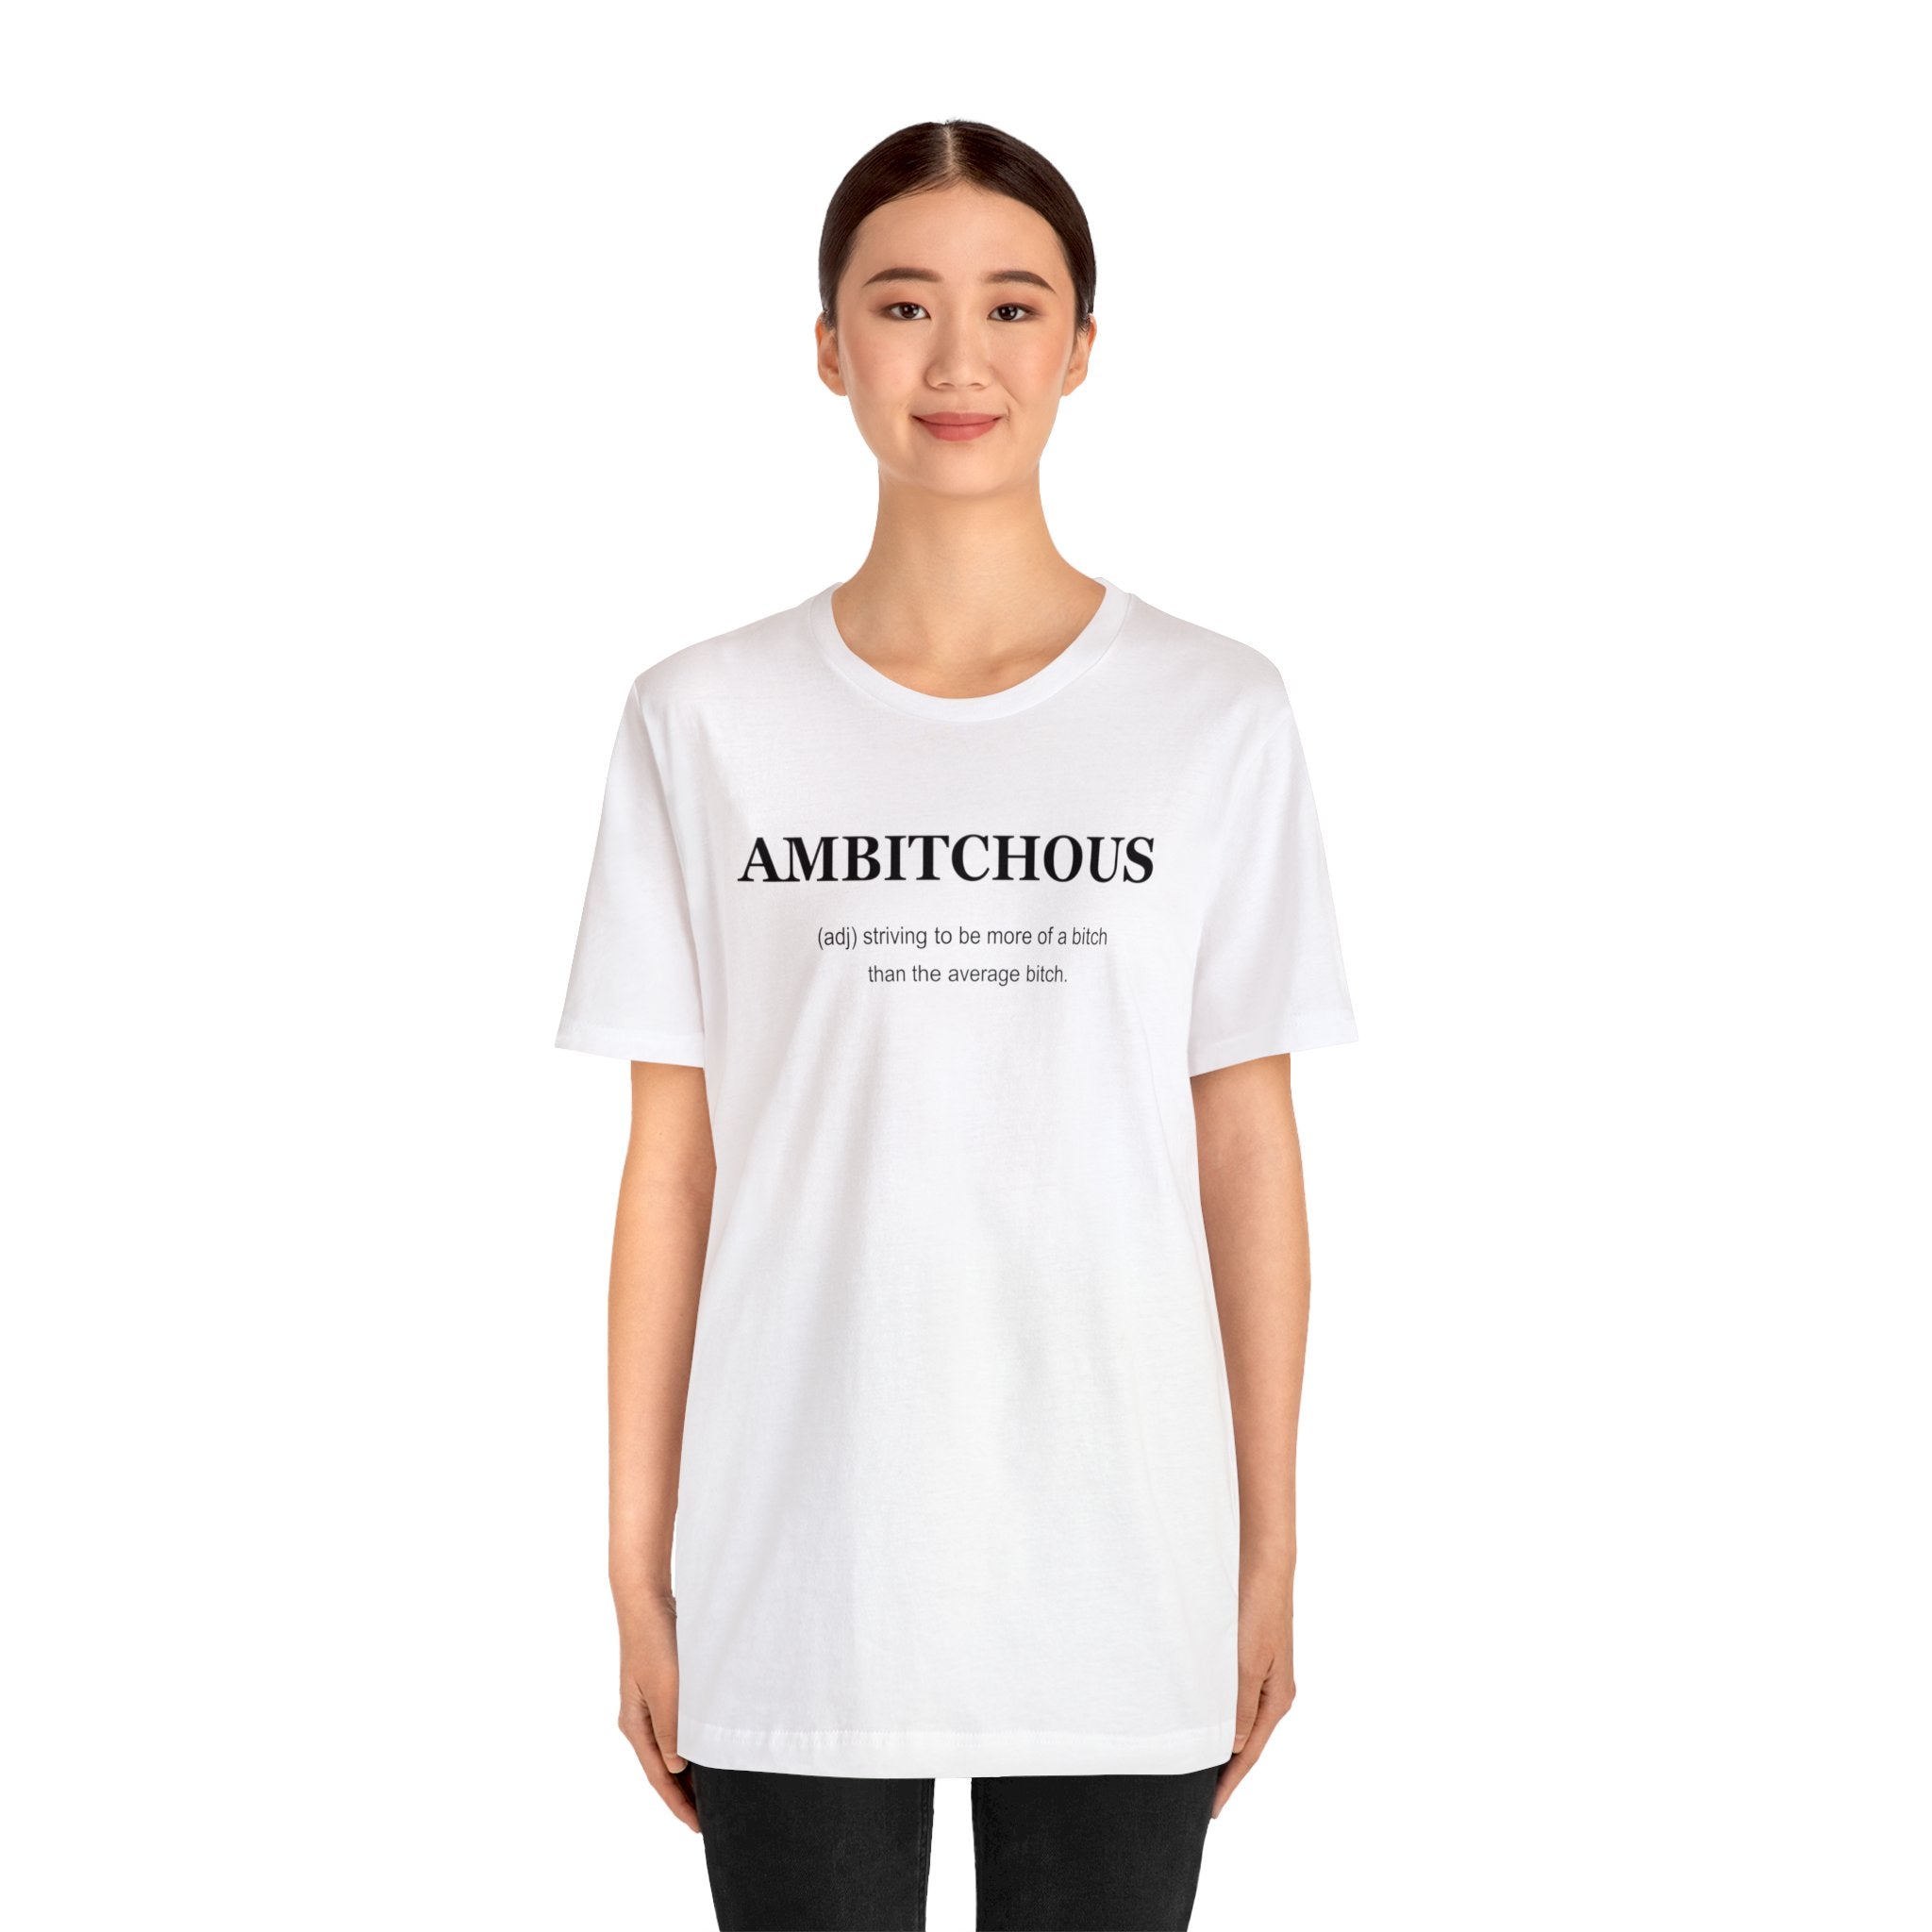 An empowering woman in a white Ambitchious T-shirt proudly displaying the word "Ambitchious".